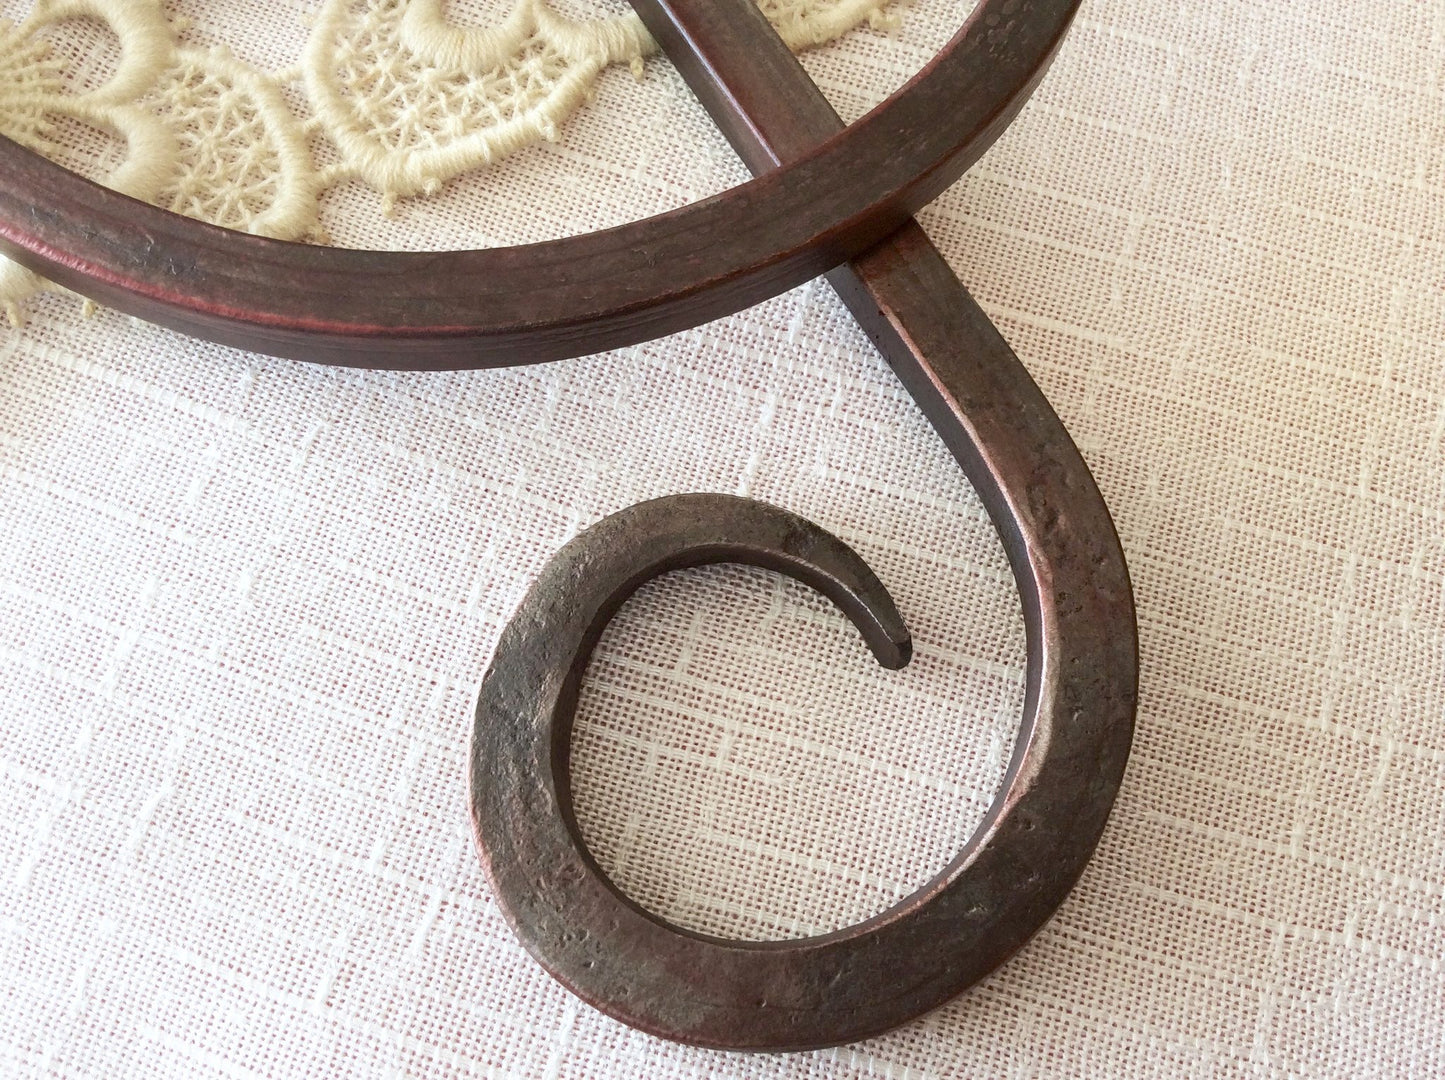 This tail of the forged iron treble clef shows the marks of the fire and hammer through the translucent red finish.